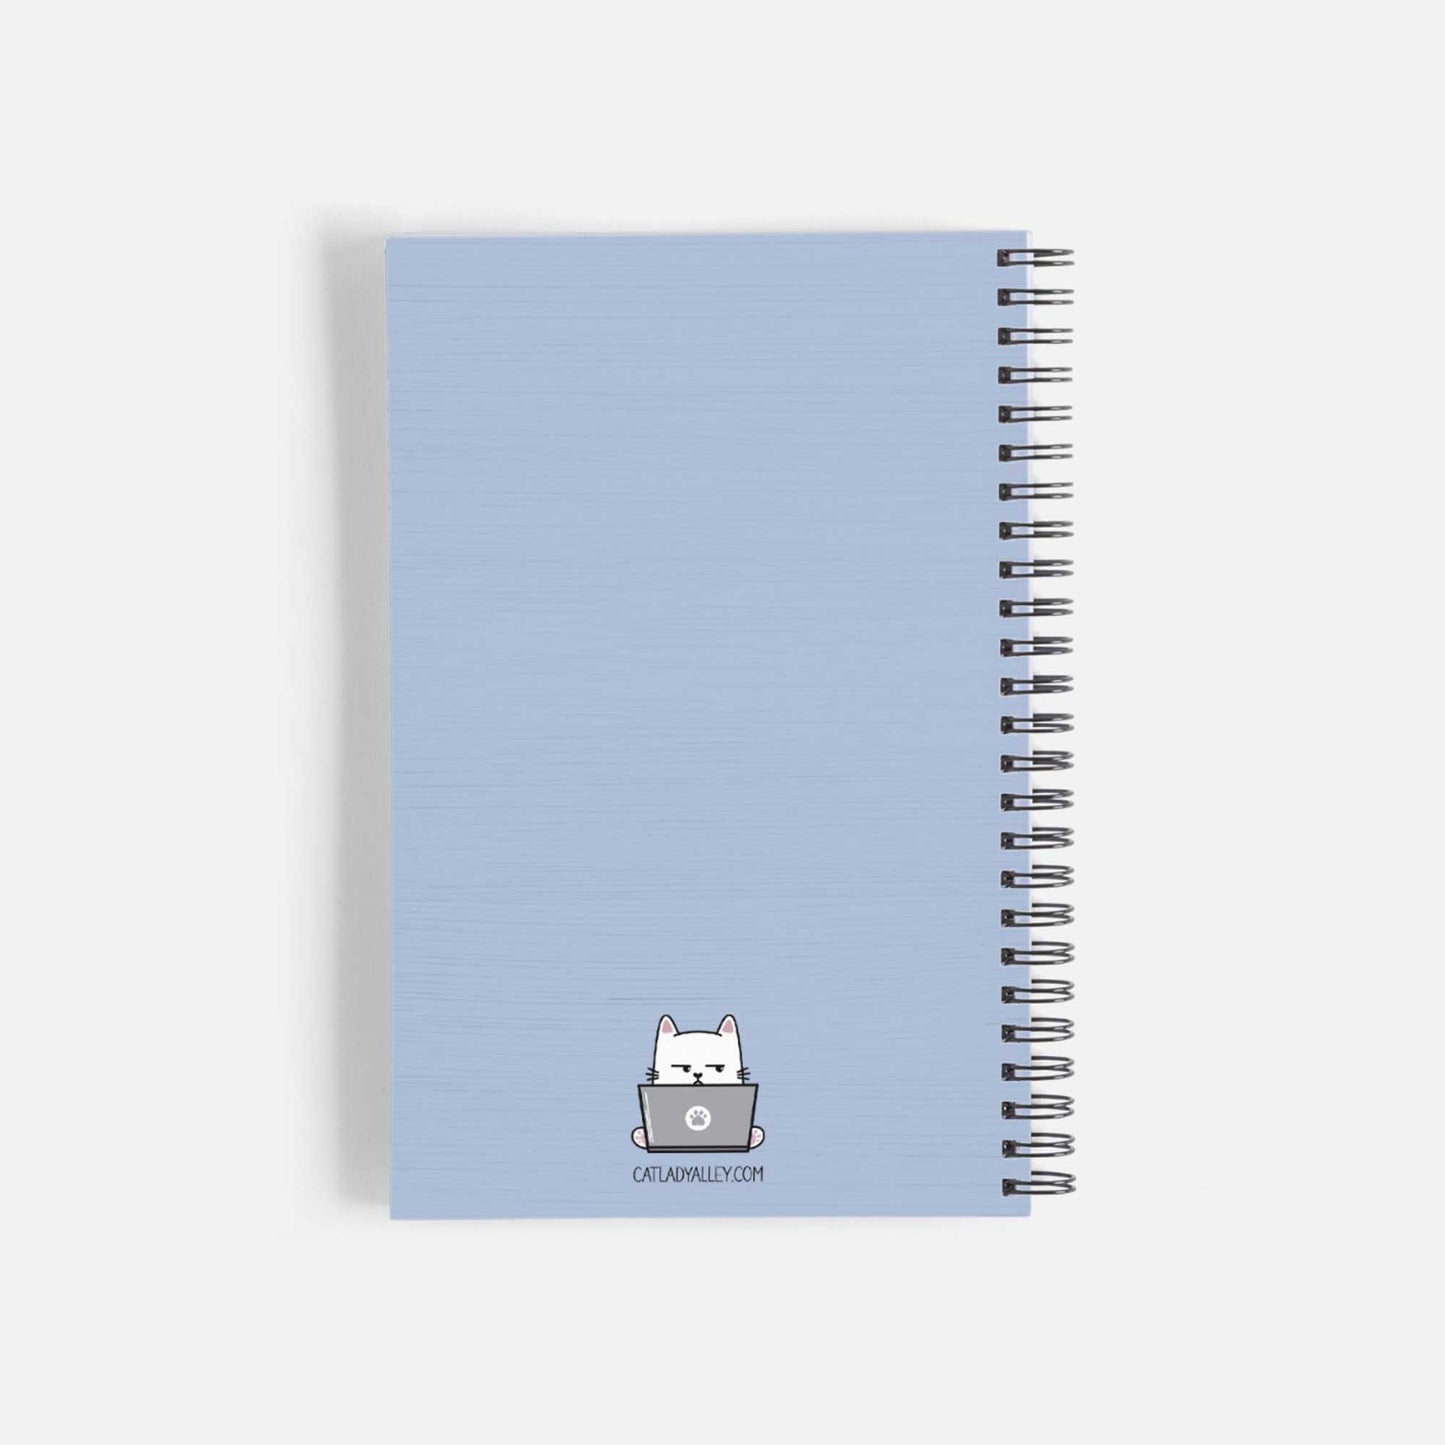 Is It Friday Yet Notebook back cover